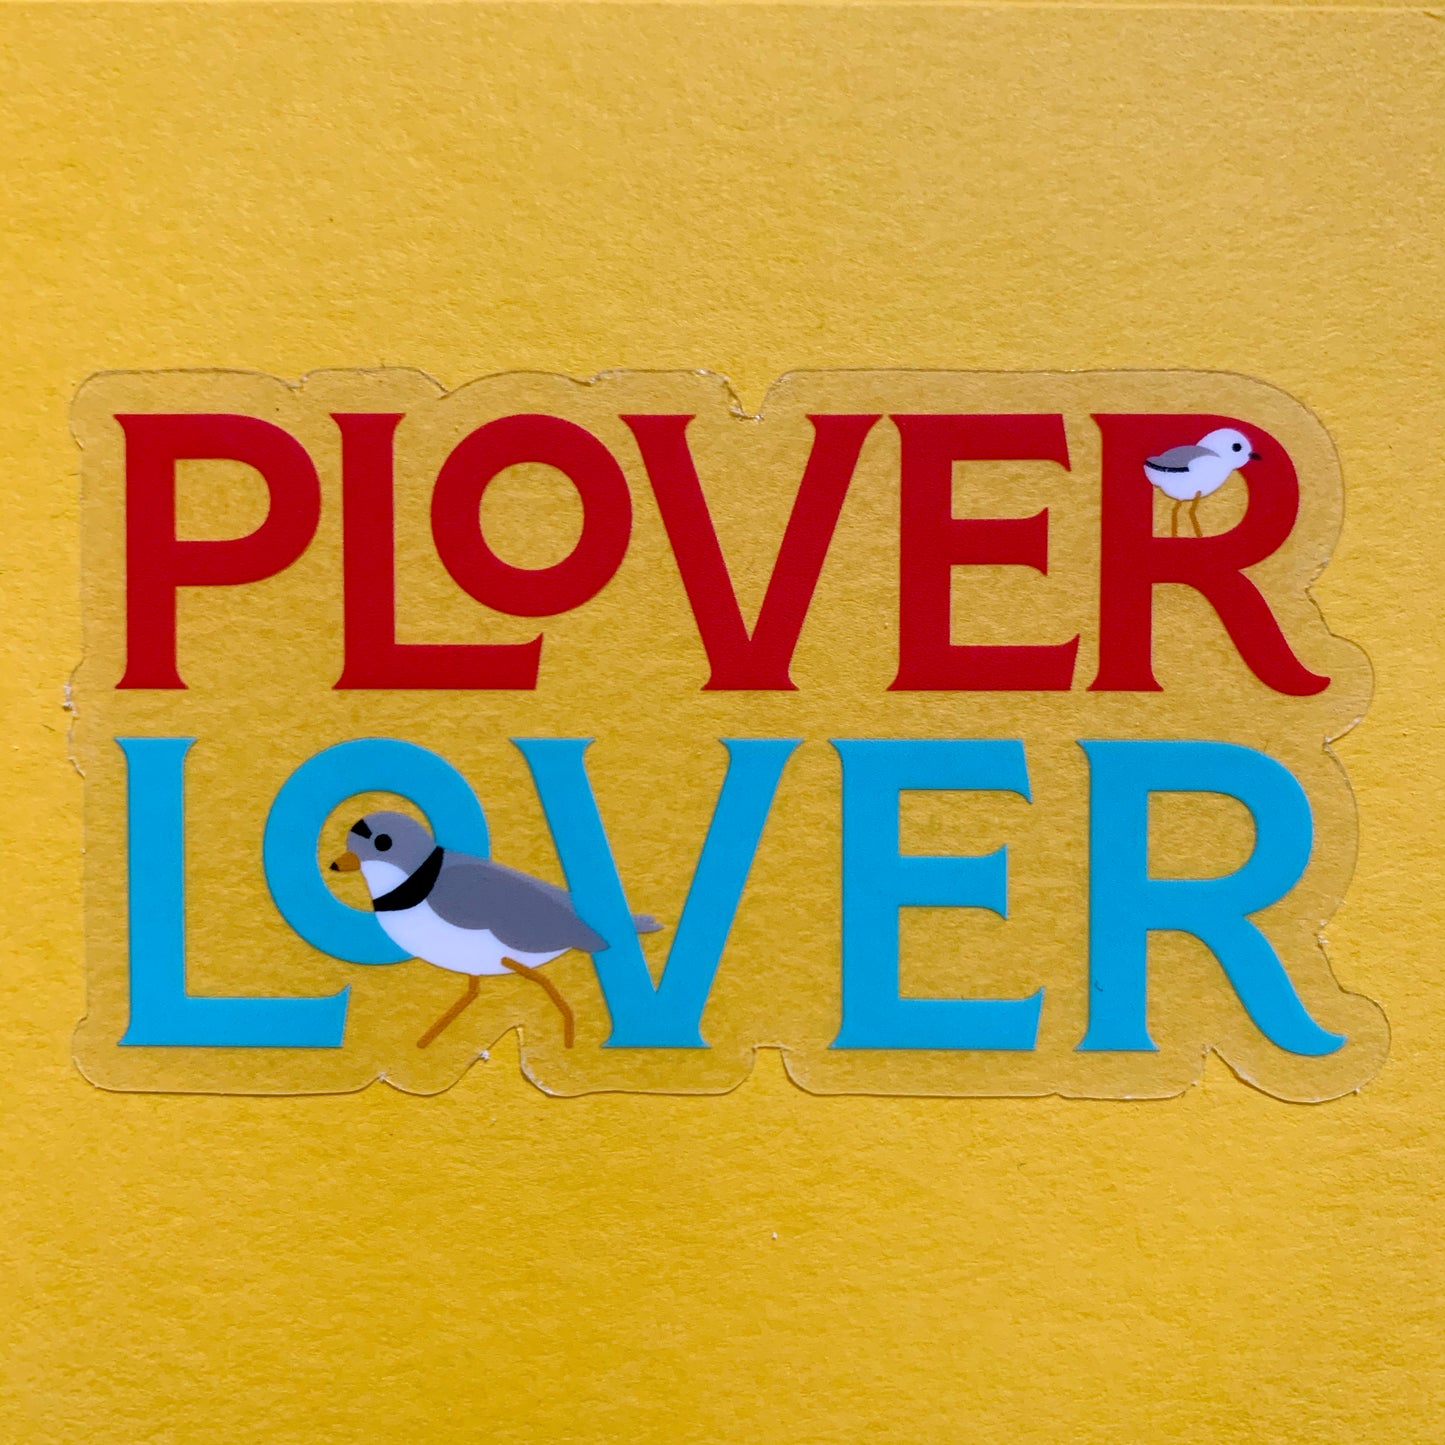 Protect the Plovers: Sticker and patch set